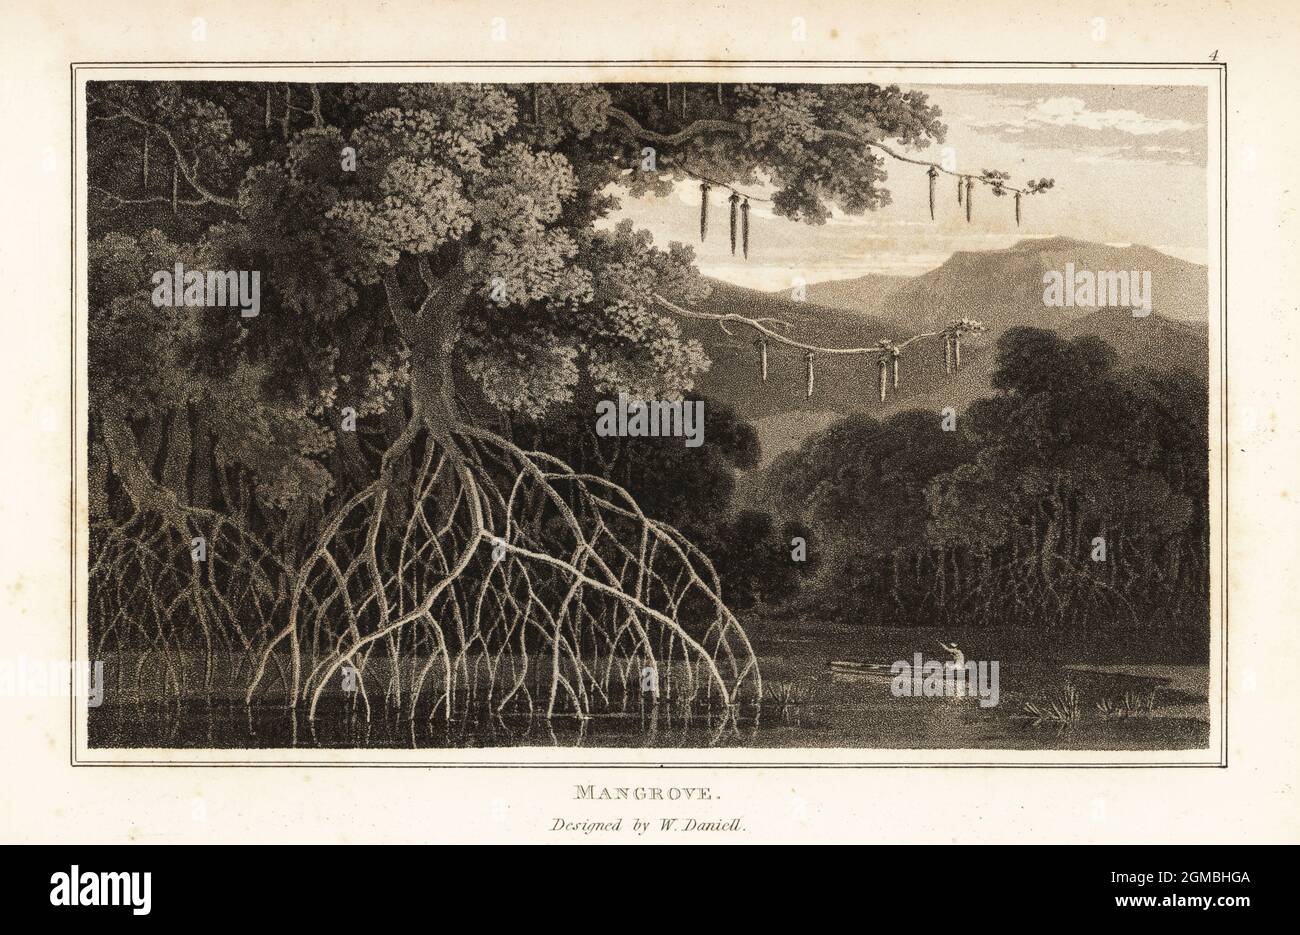 Large-leafed orange mangrove or oriental mangrove, Bruguiera gymnorhiza, growing with stilt roots in Asian swamps. A native man rows a canoe in the swamp. Mangrove, Rhizophora gymnorhiza. Aquatint drawn and engraved by William Daniell from William Wood’s Zoography, Cadell and Davies, 1807. Stock Photo